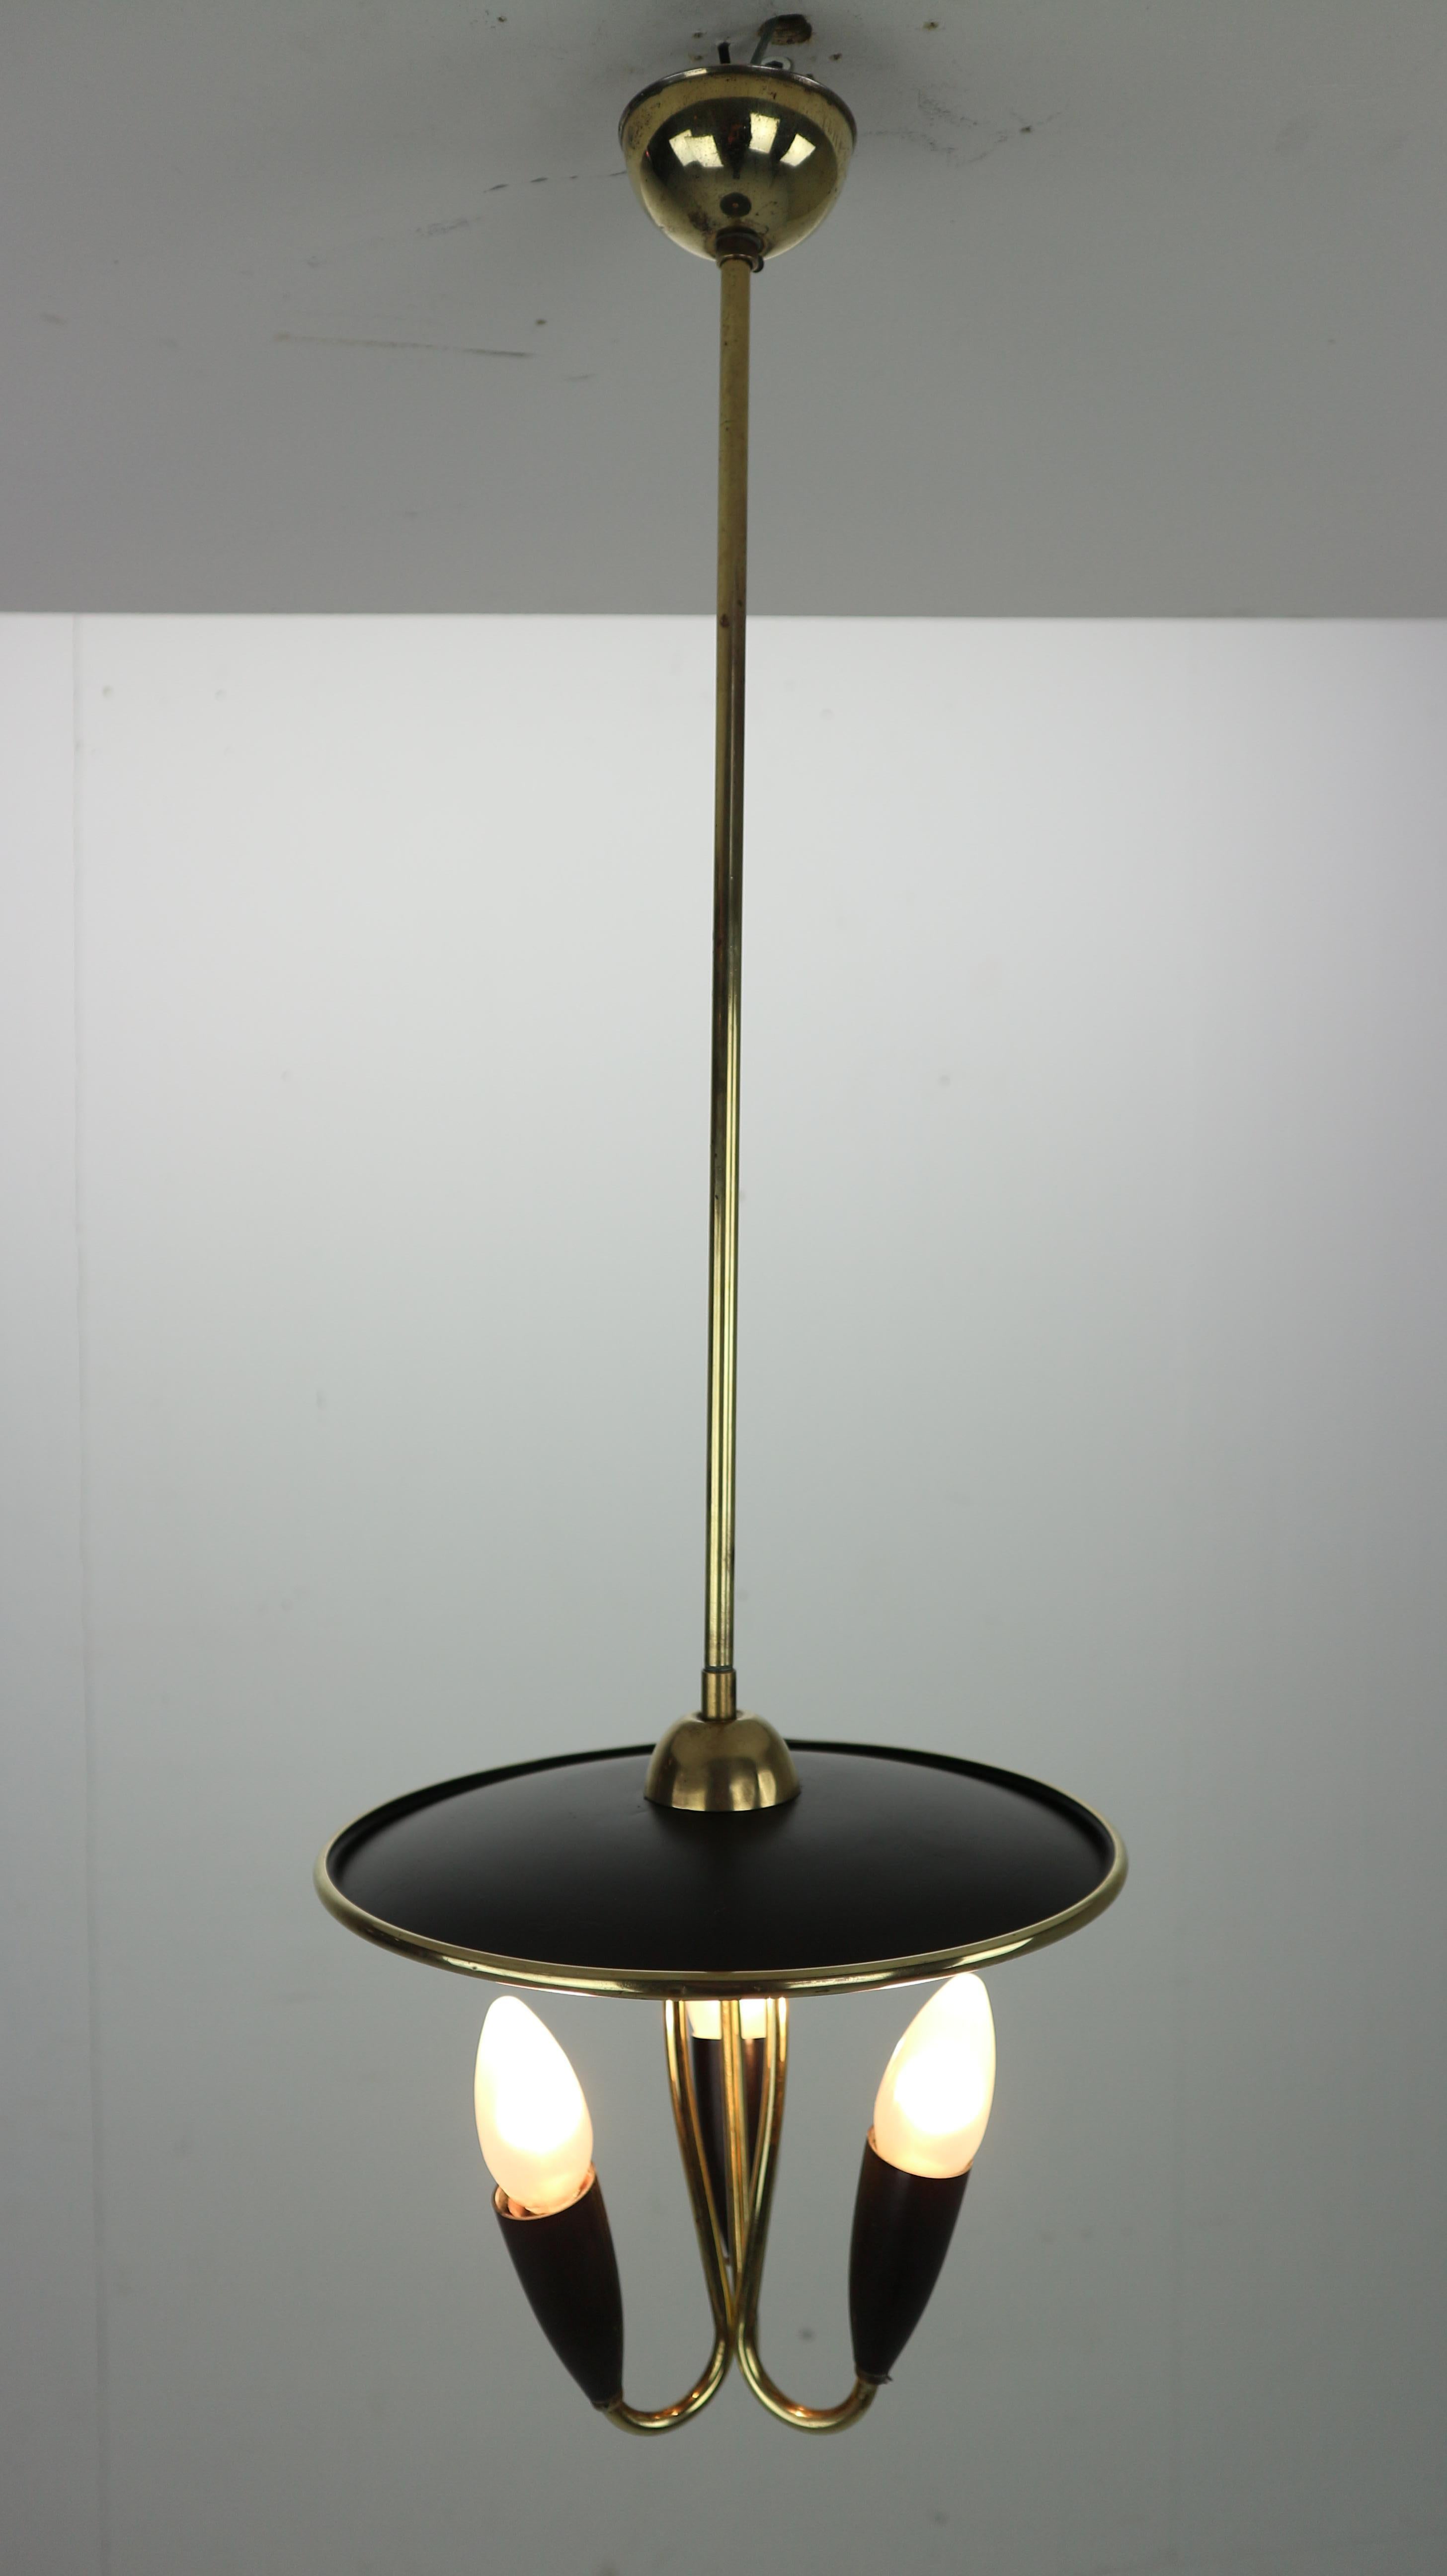 Mid-Century Modern period chandelier lamp made in 1950s France.
An elegant and typical fifties design lamp is made from black metal and brass curved details around it.
Three lamp bowl uplight lamp gives a warm light and creates a cozy atmosphere